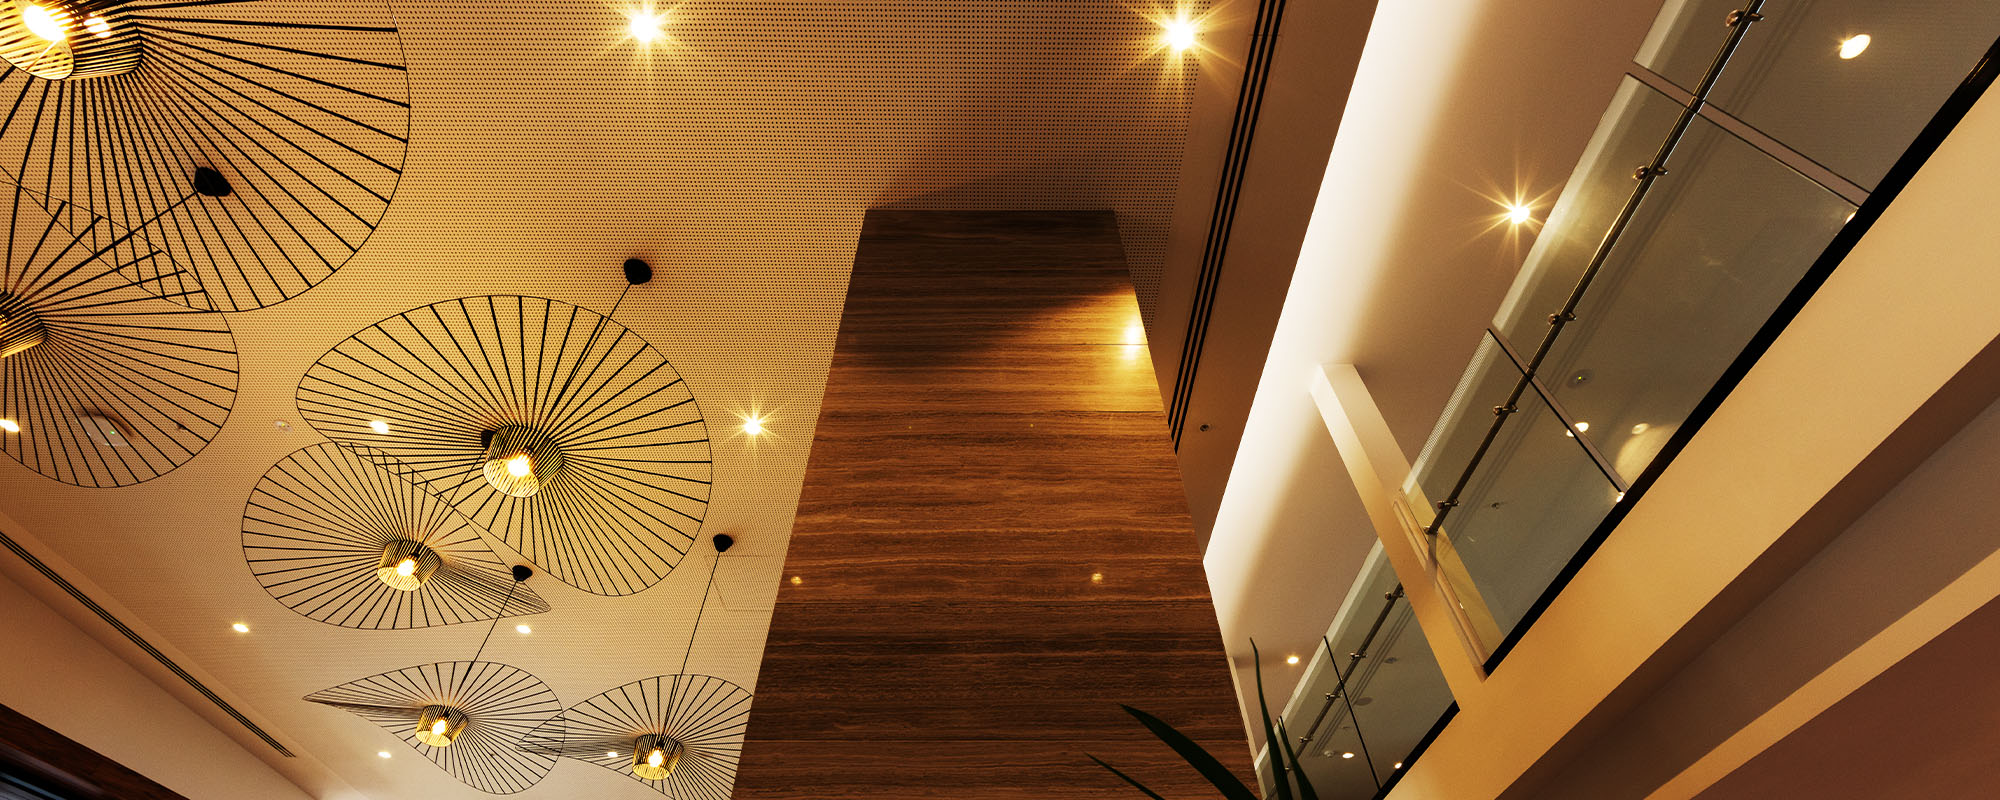 ceiling in foyer of europa building with beautiful lighting